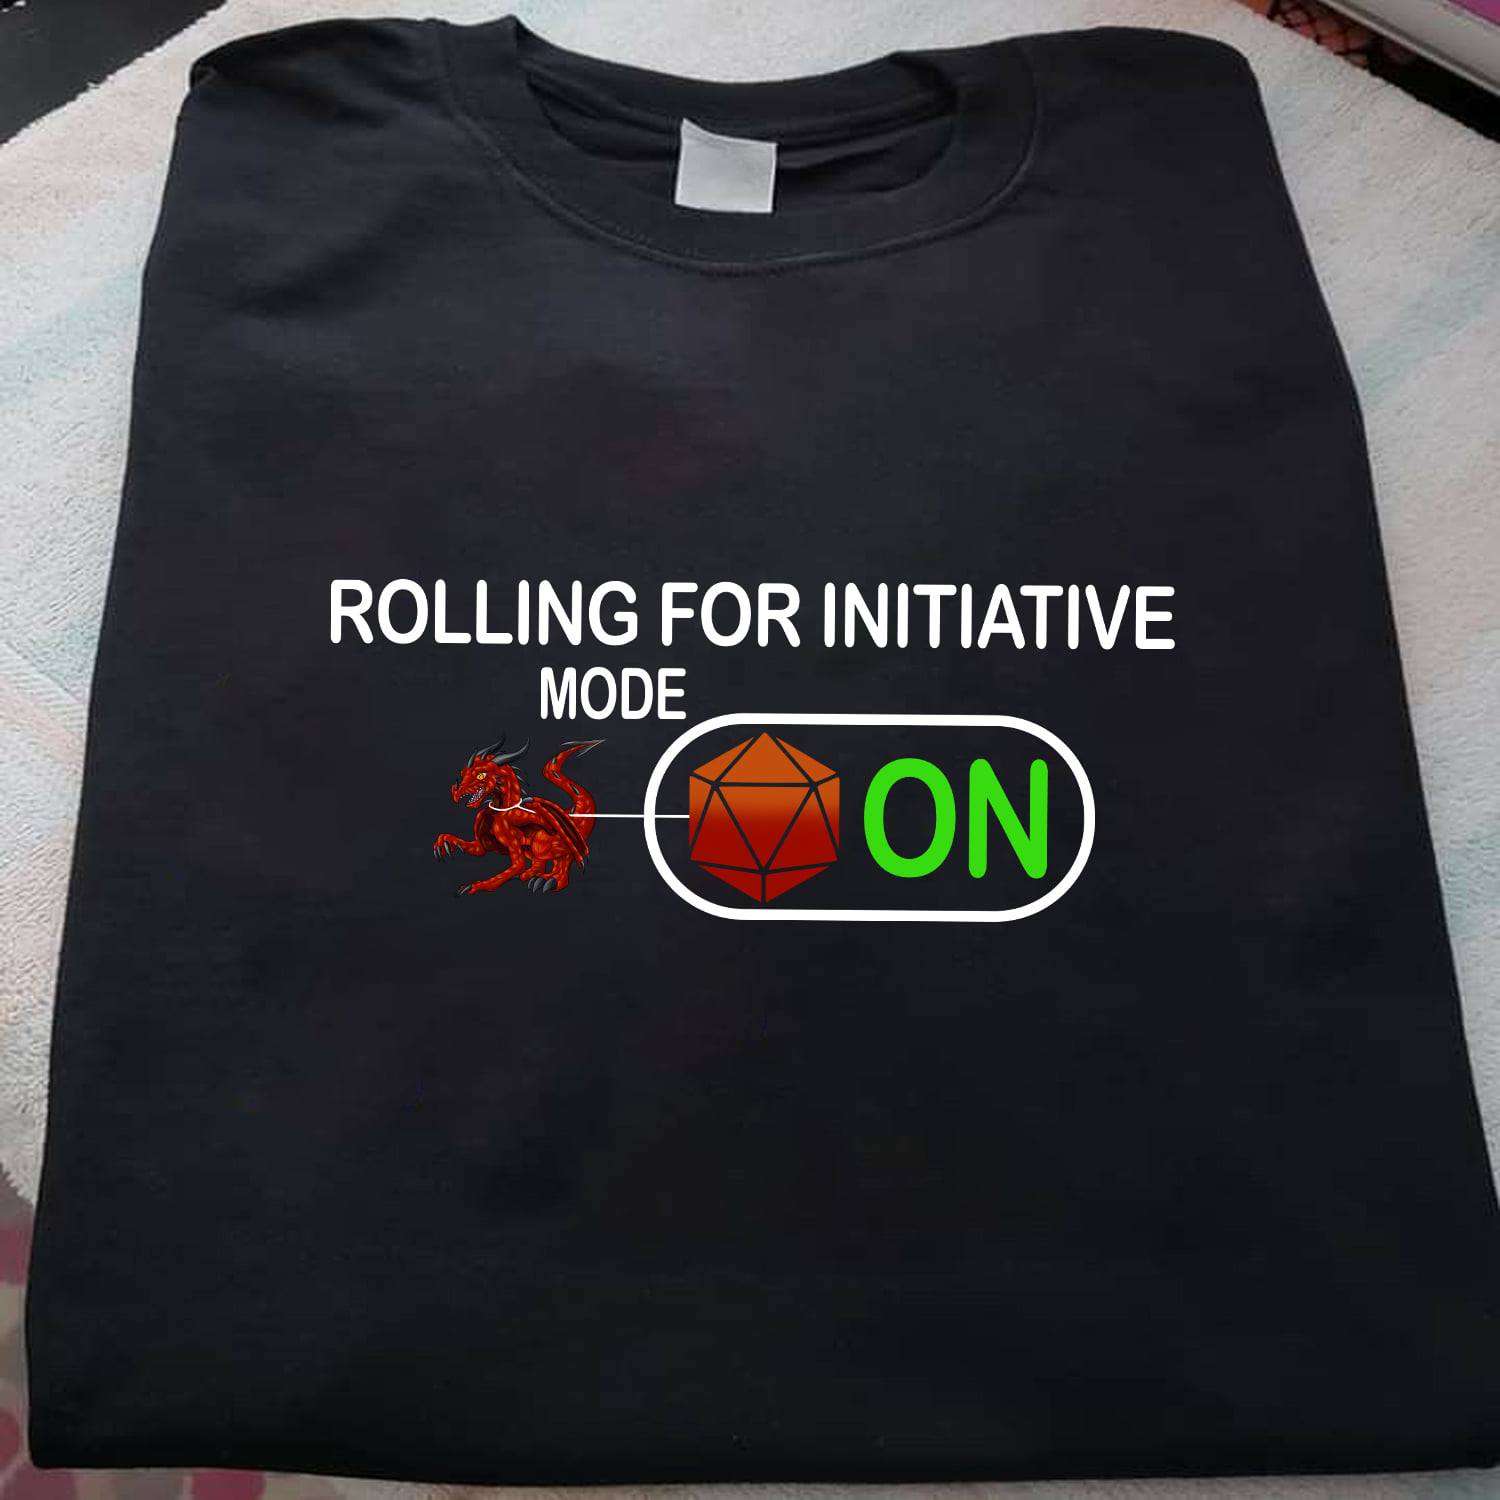 Rolling Dice Dragon - Rolling for initiative mode on